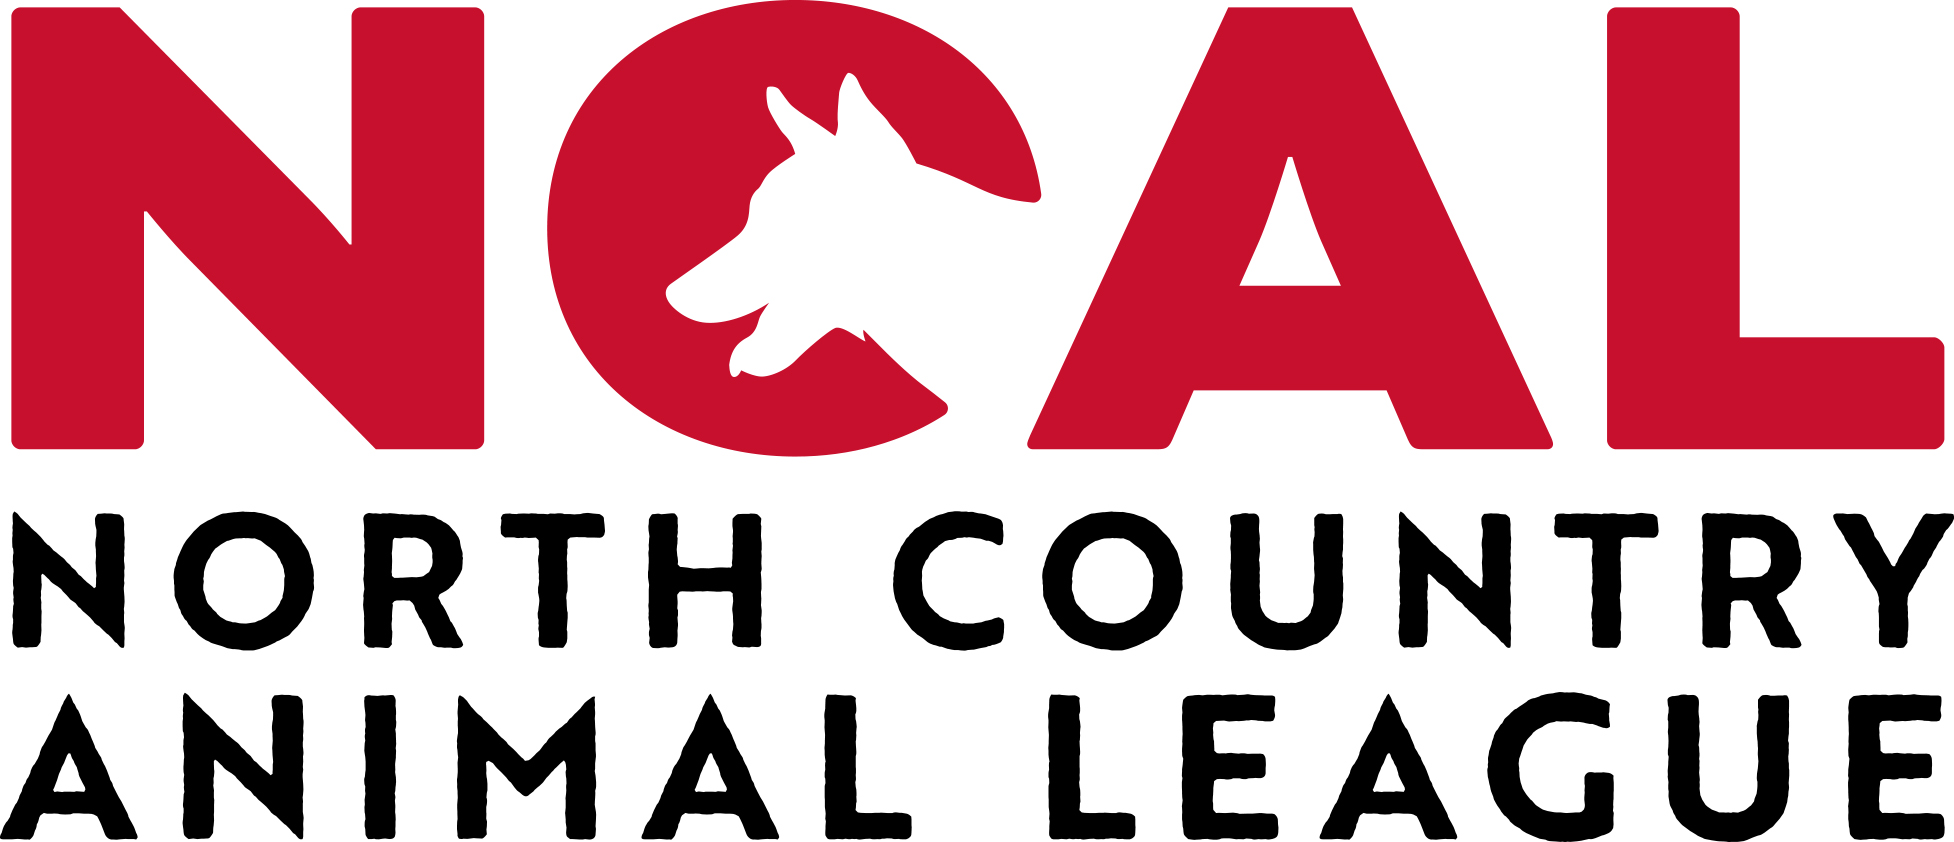 North Country Animal League logo